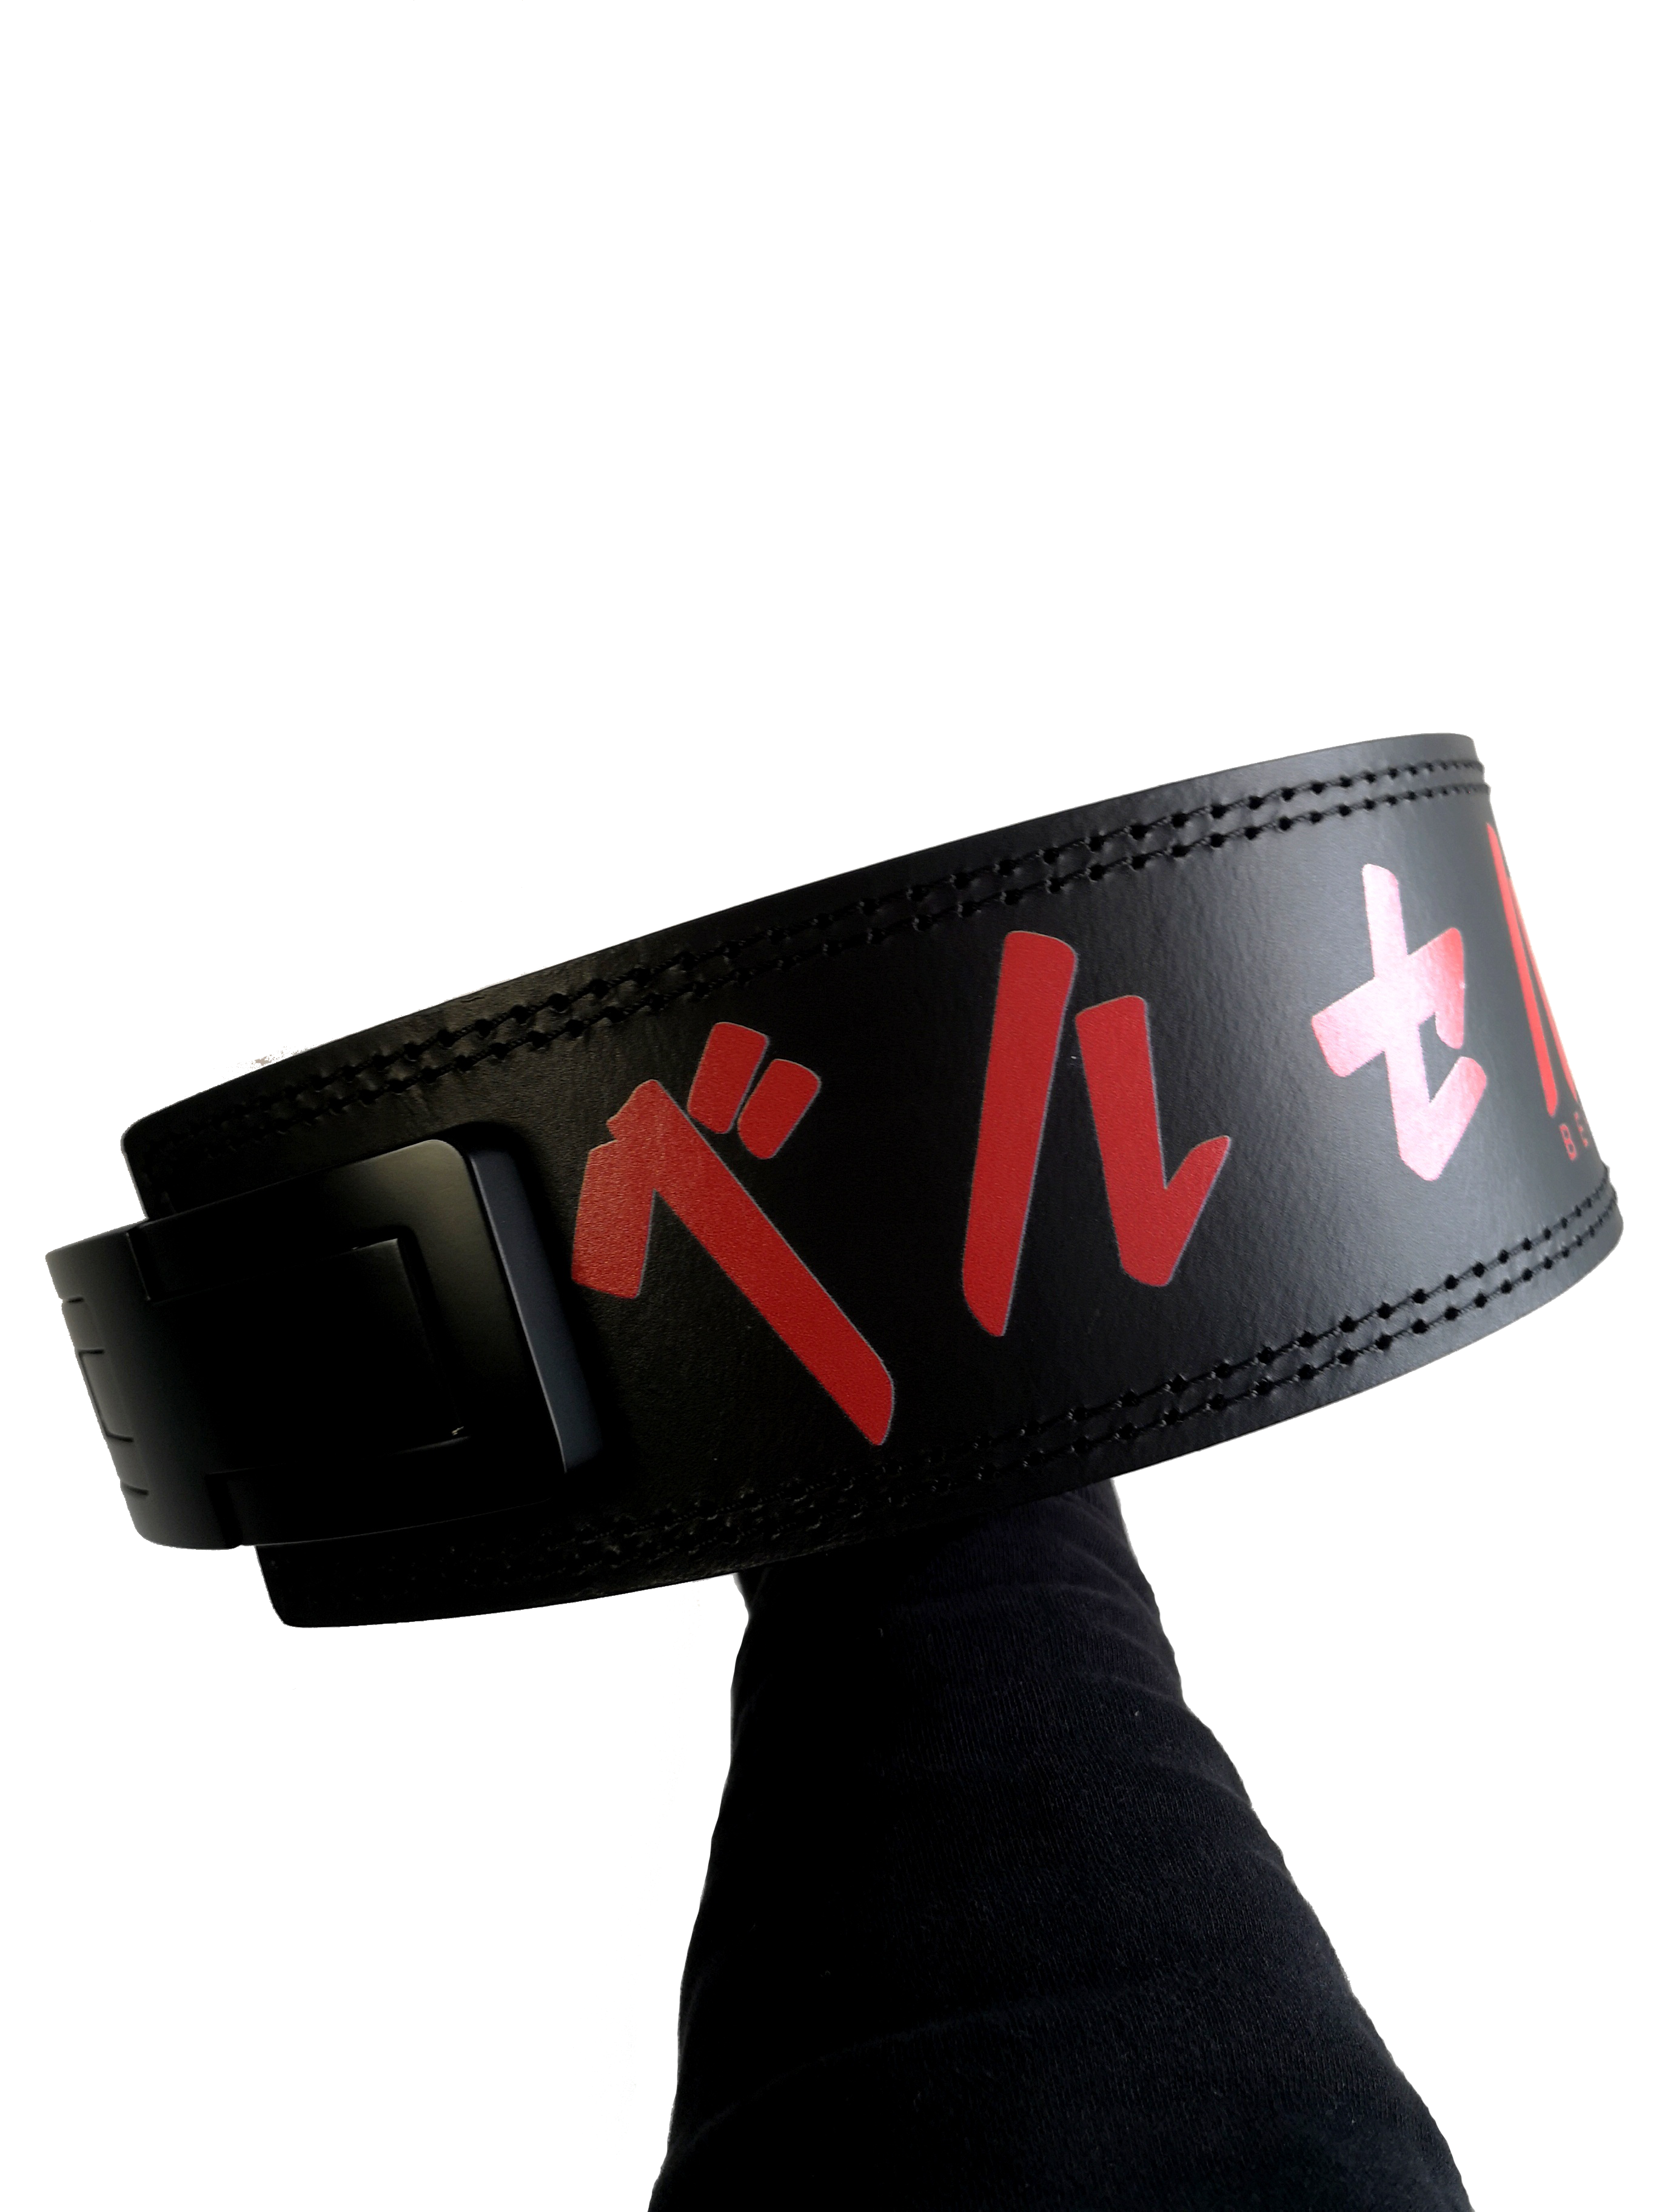 Premium Weight Lifting Belts  Leather and Nylon Belts  HUSTLERS ONLY PK